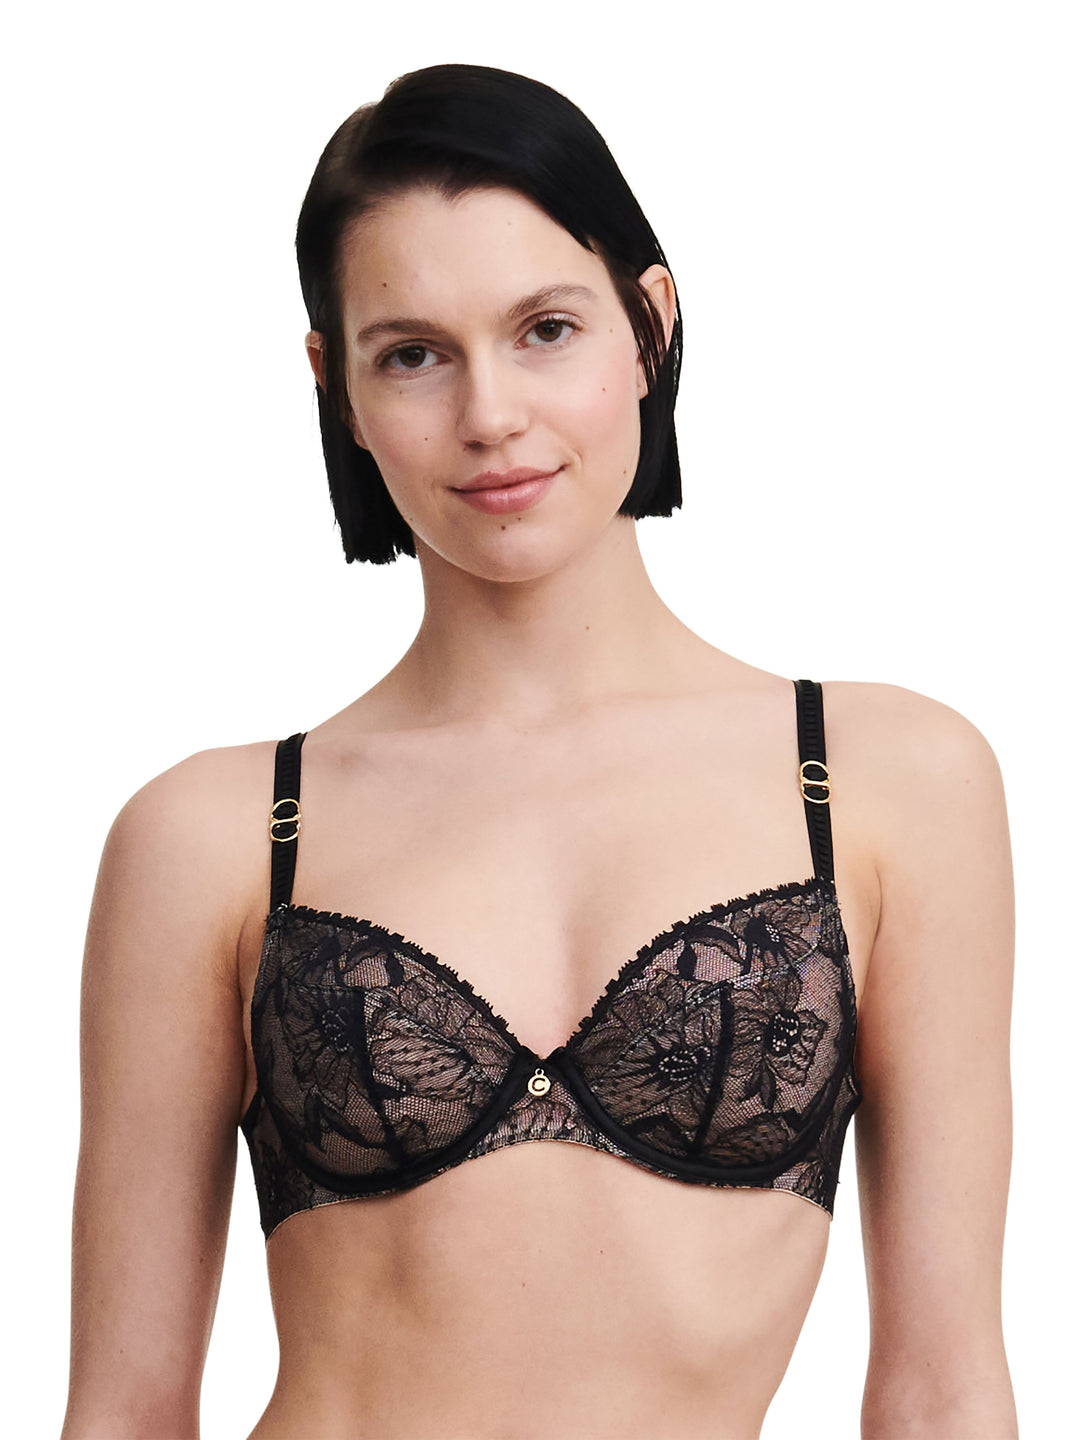 Chantelle Orchids Push Up Bra in English Rose: 36C